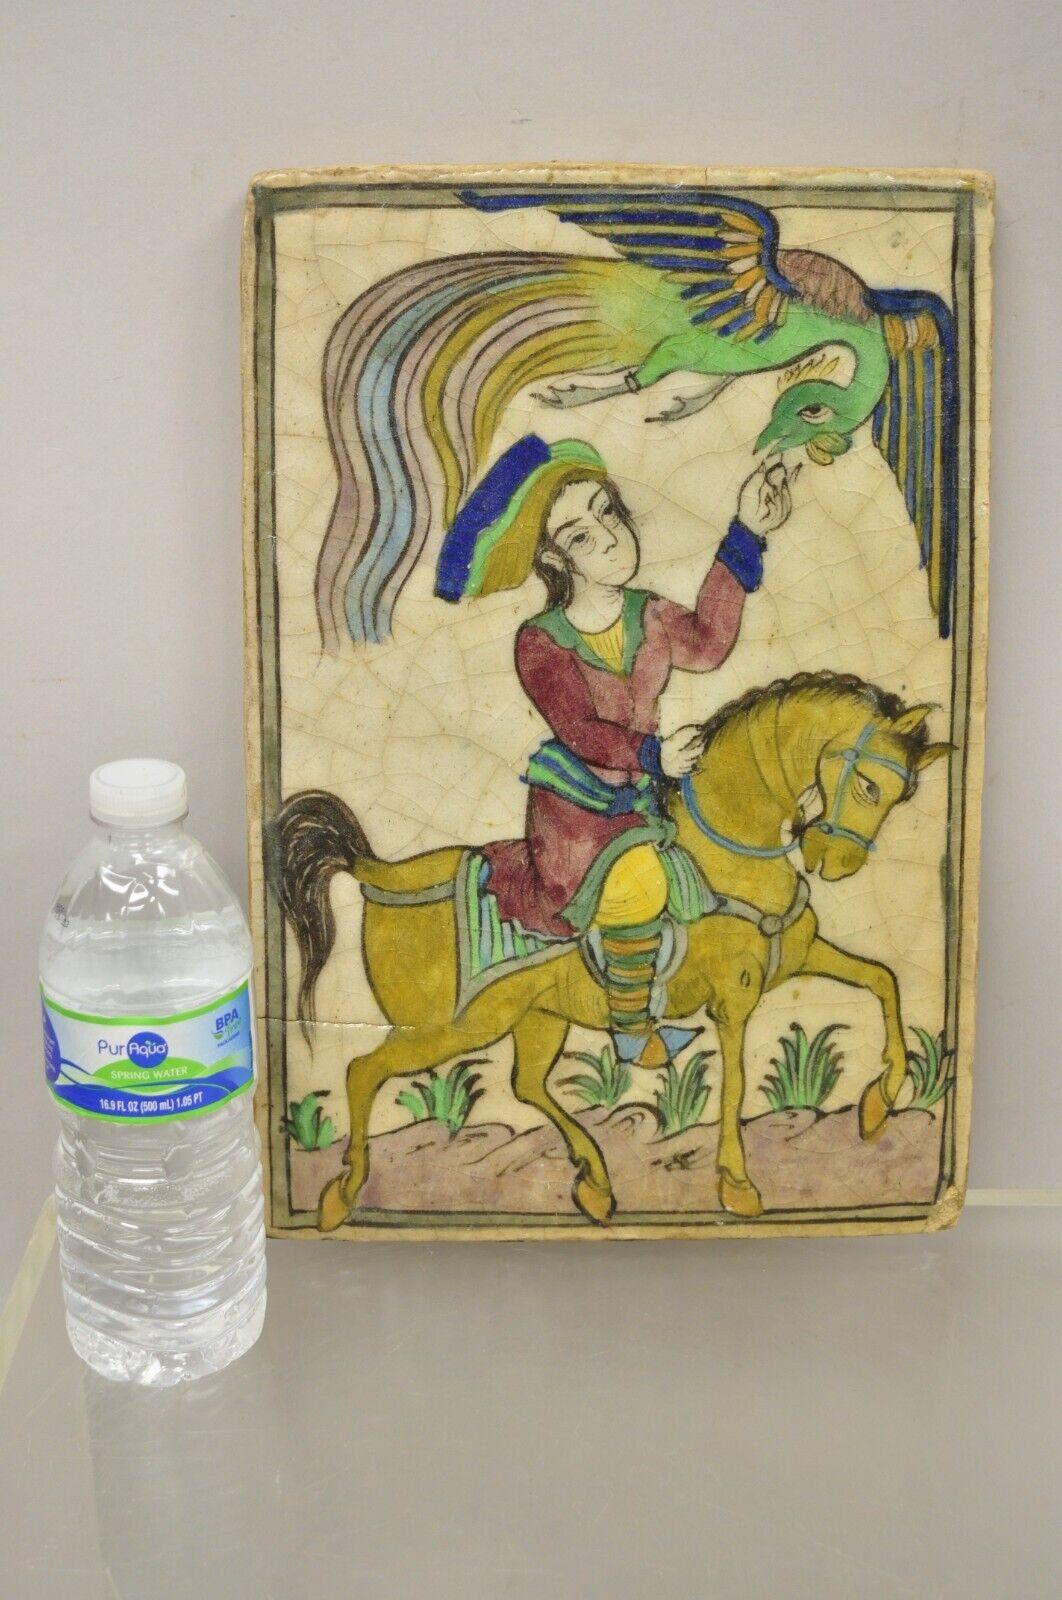 Antique Persian Iznik Qajar Style Large Ceramic Pottery Tile Bird Horse and Rider C1. Original crackle glazed finish, heavy ceramic pottery construction, very impressive detail, wonderful style and form. Great to mount as wall art or accent tiles